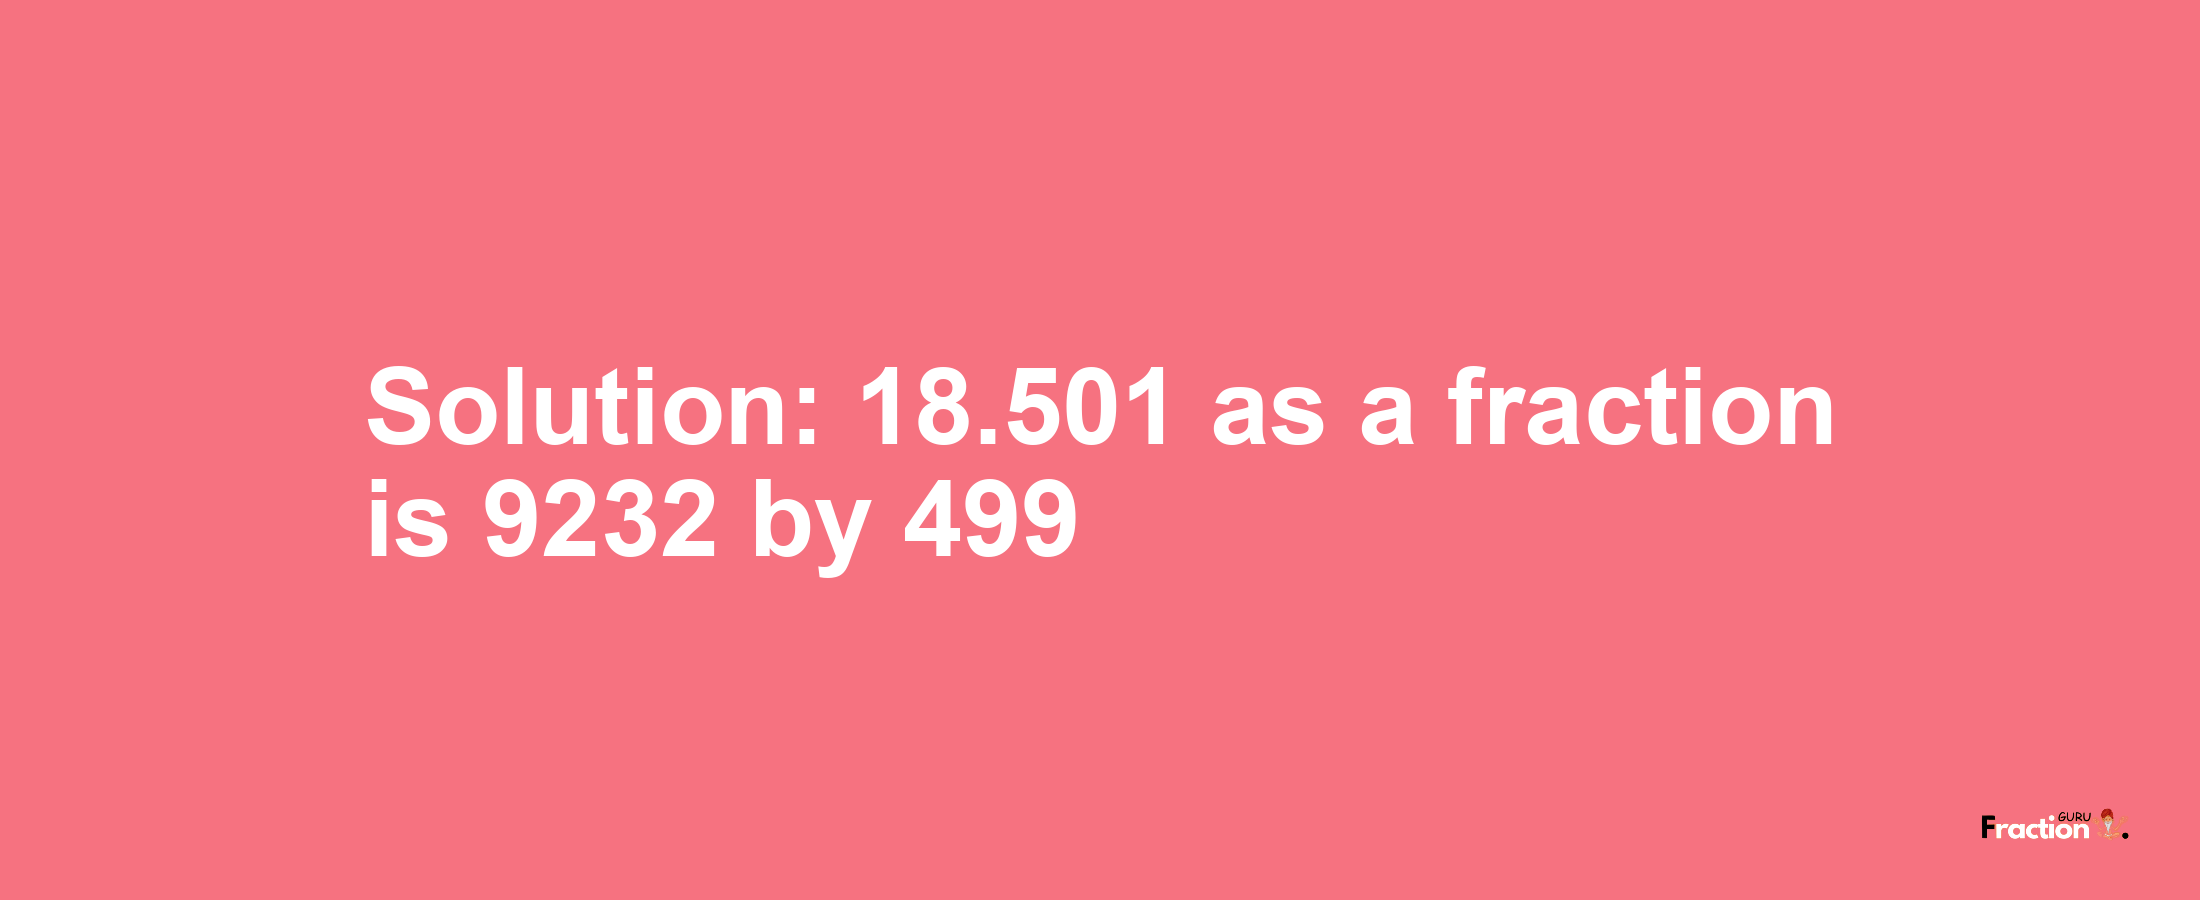 Solution:18.501 as a fraction is 9232/499